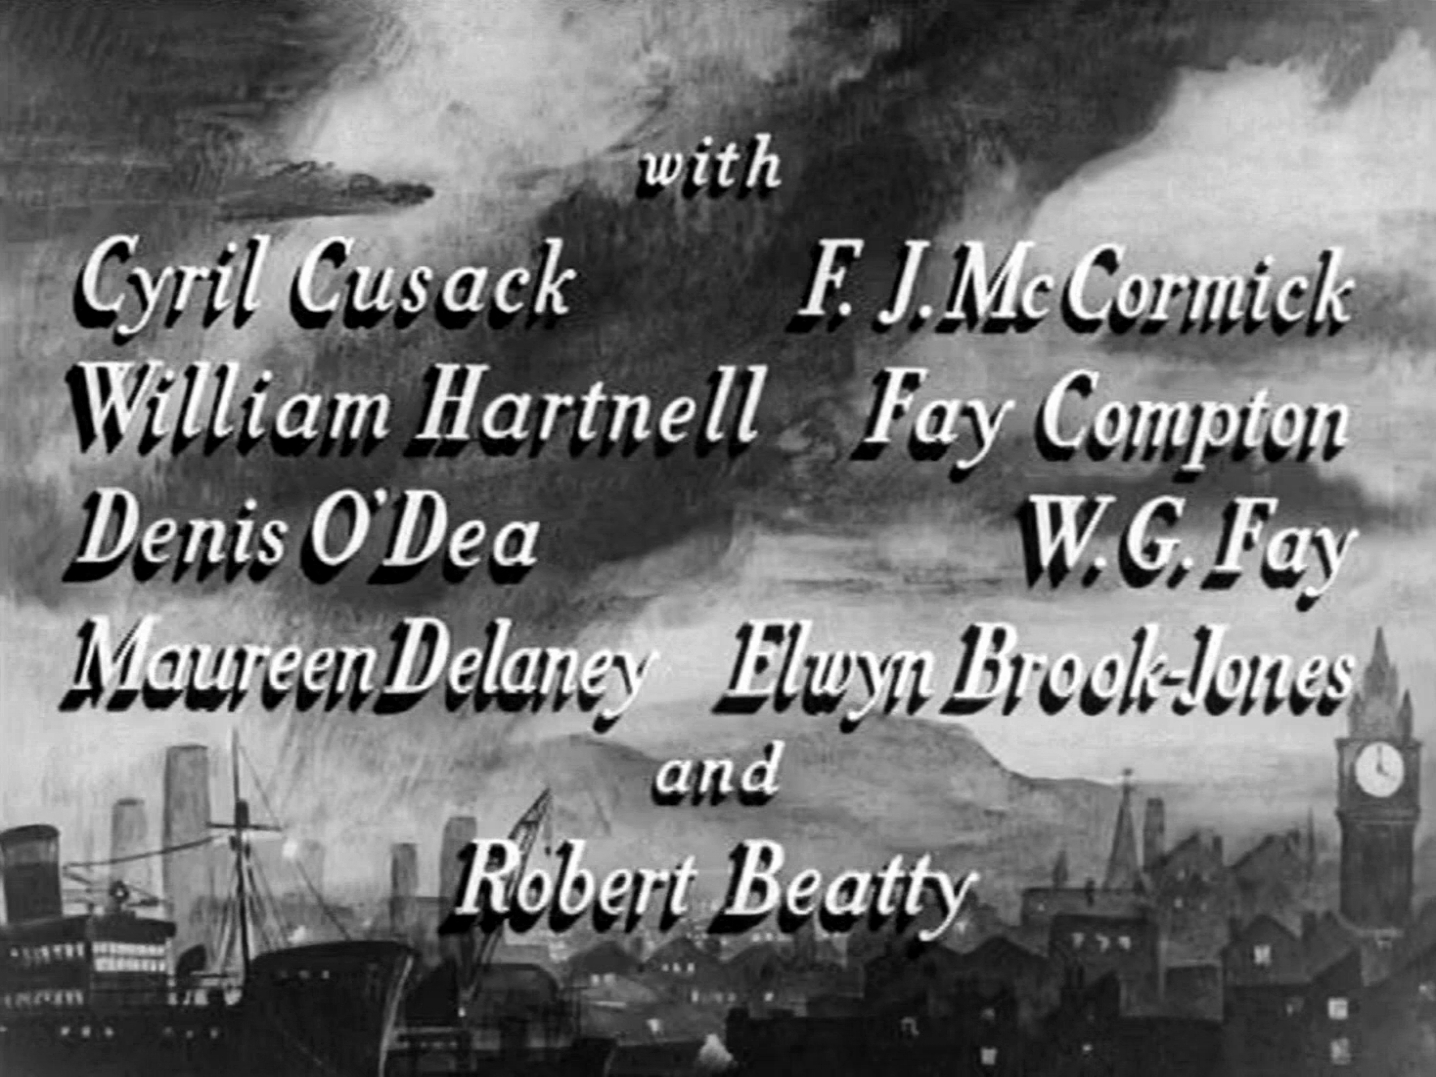 Main title from Odd Man Out (1947) (5).  With Cyril Cusack William Hartnell, Denis O’Dea, Maureen Delaney, F J McCormick, Fay Compton, W G Fay, Elwyn Brook-Jones and Robert Beatty